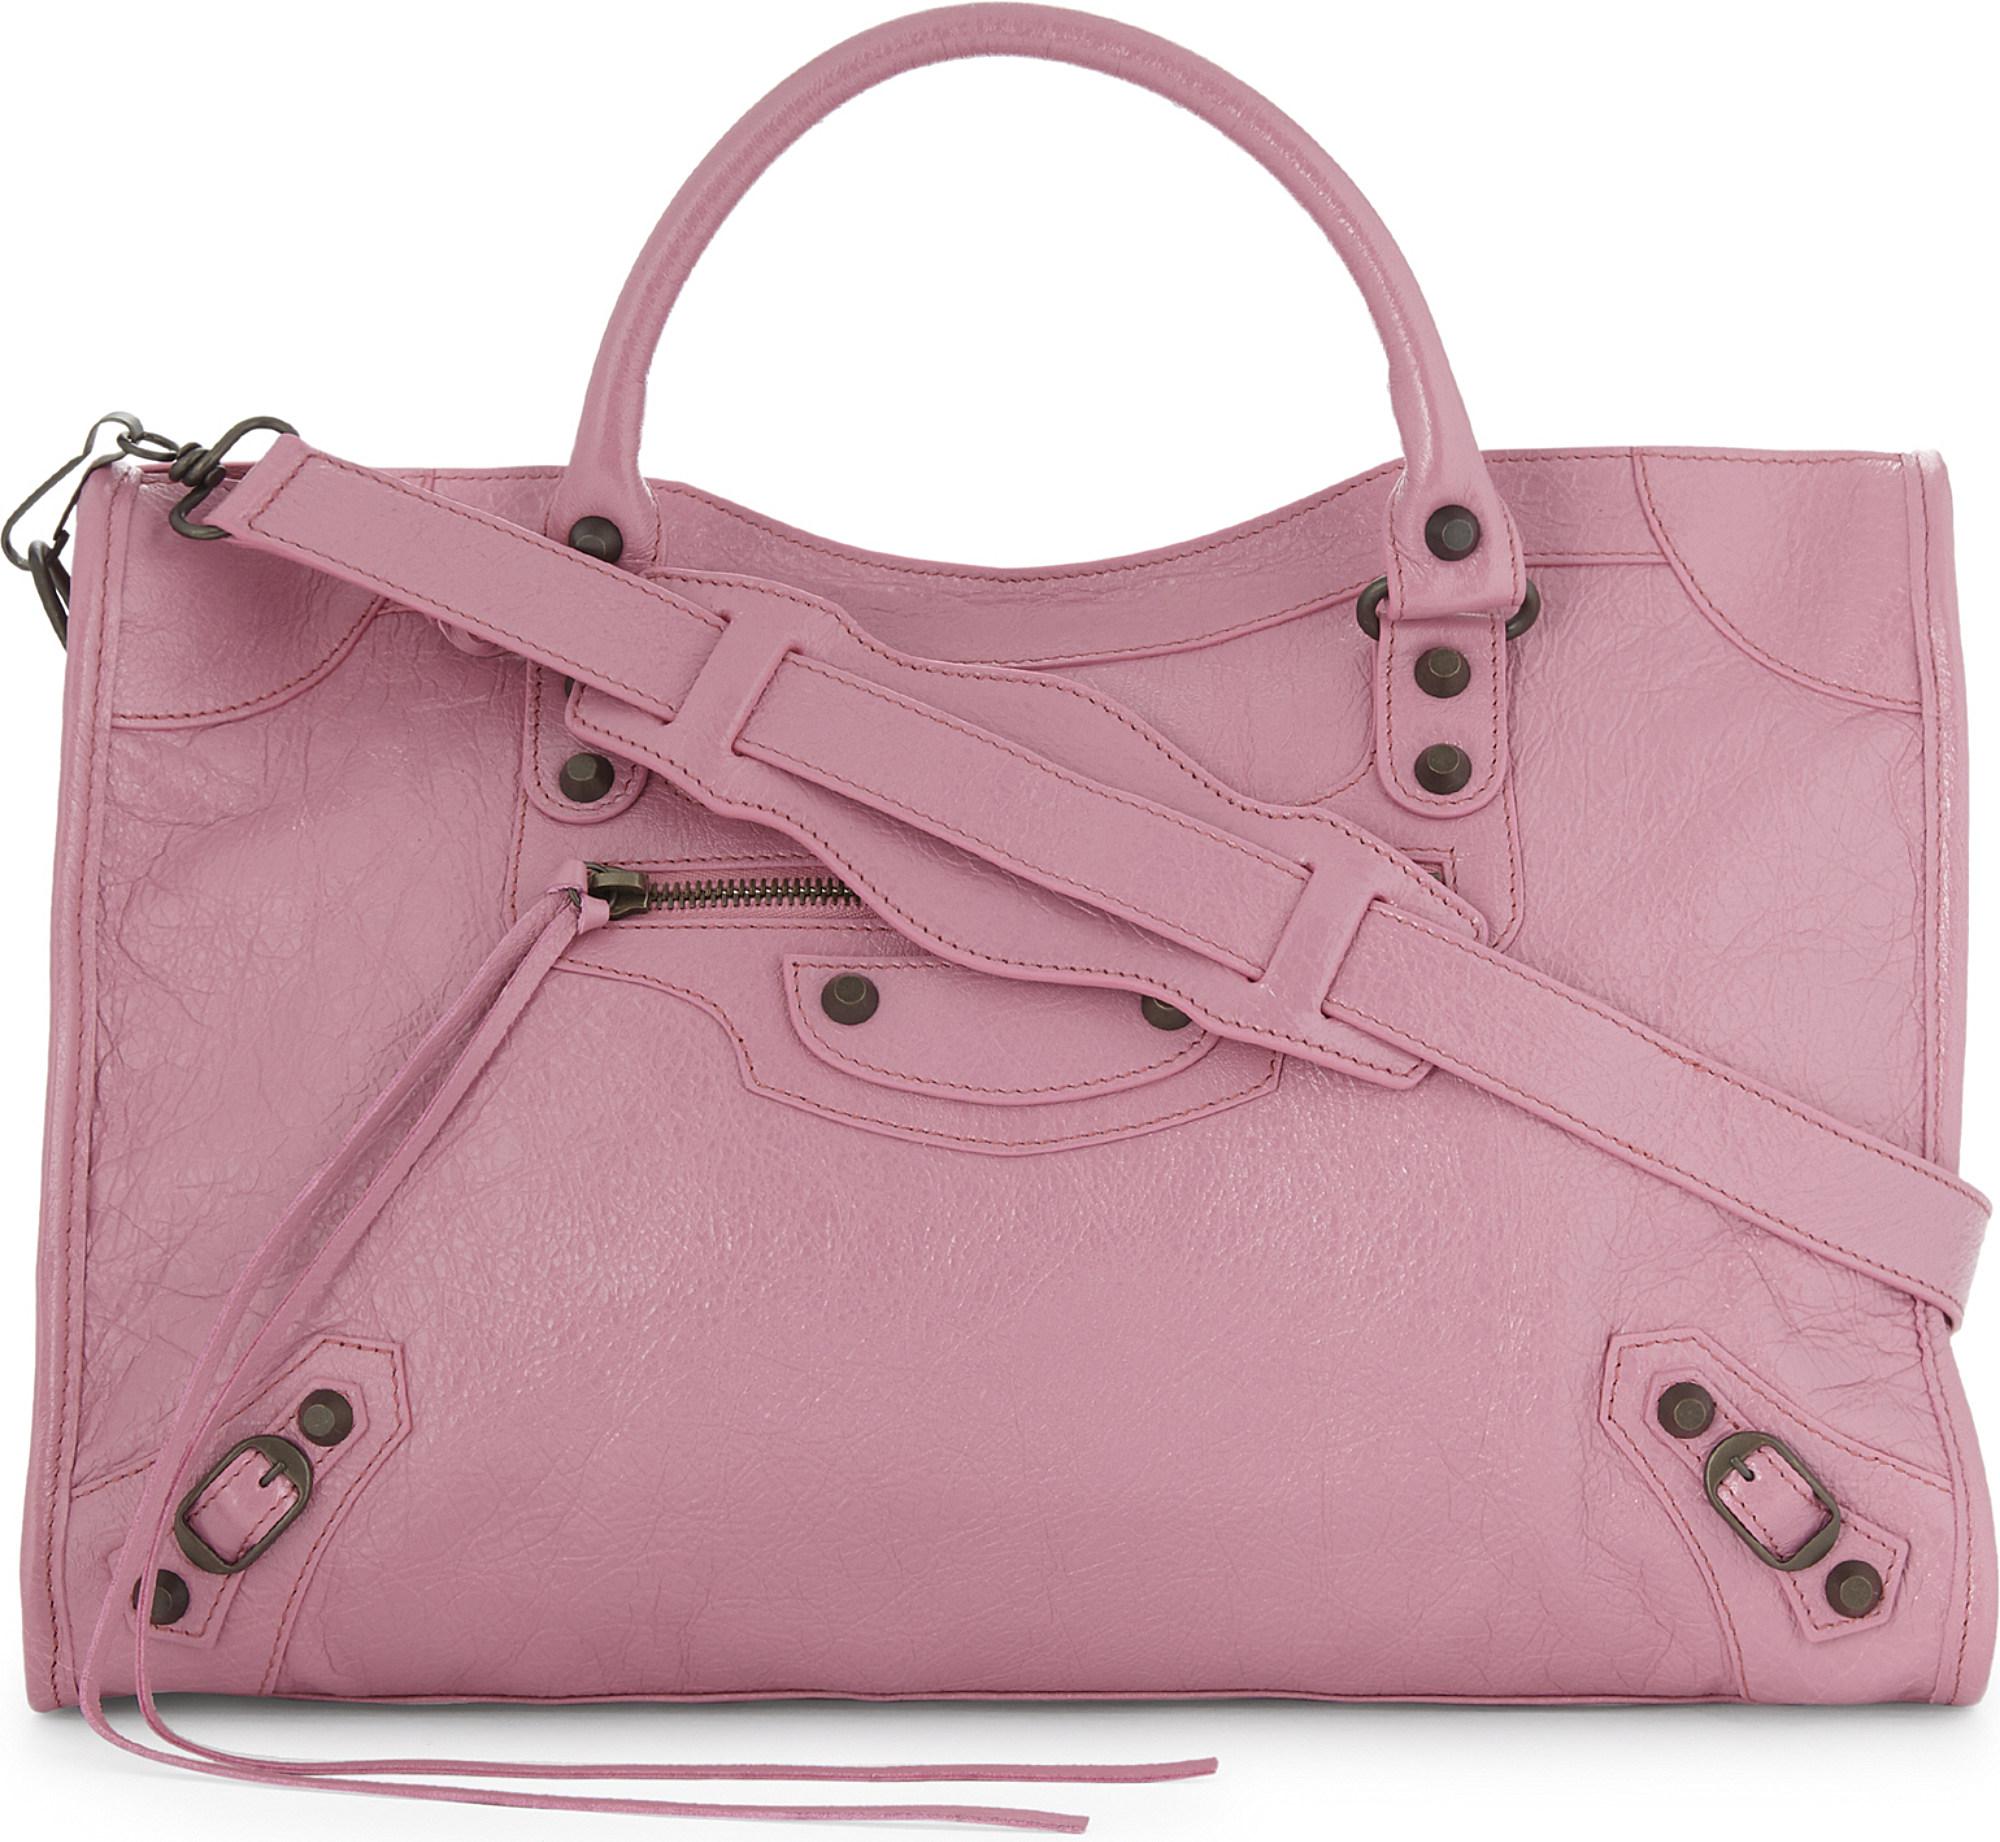 Balenciaga Classic City Arena Grained Leather Shoulder Bag in Pink - Lyst